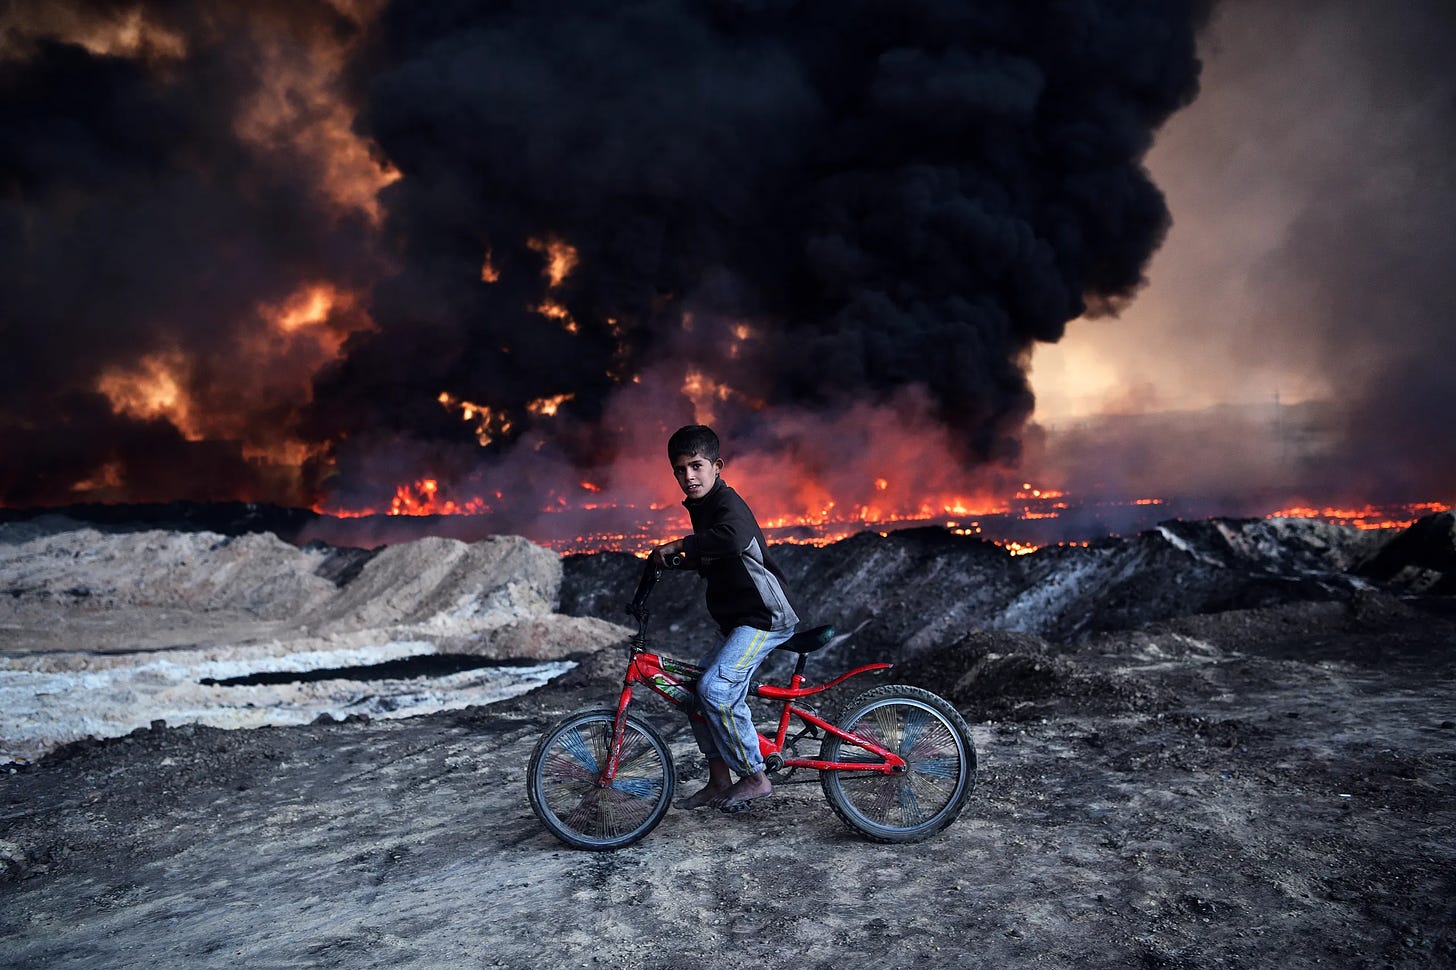 "Photo of the Week: The Raging Inferno of Iraq’s Oil Fields" - Wired